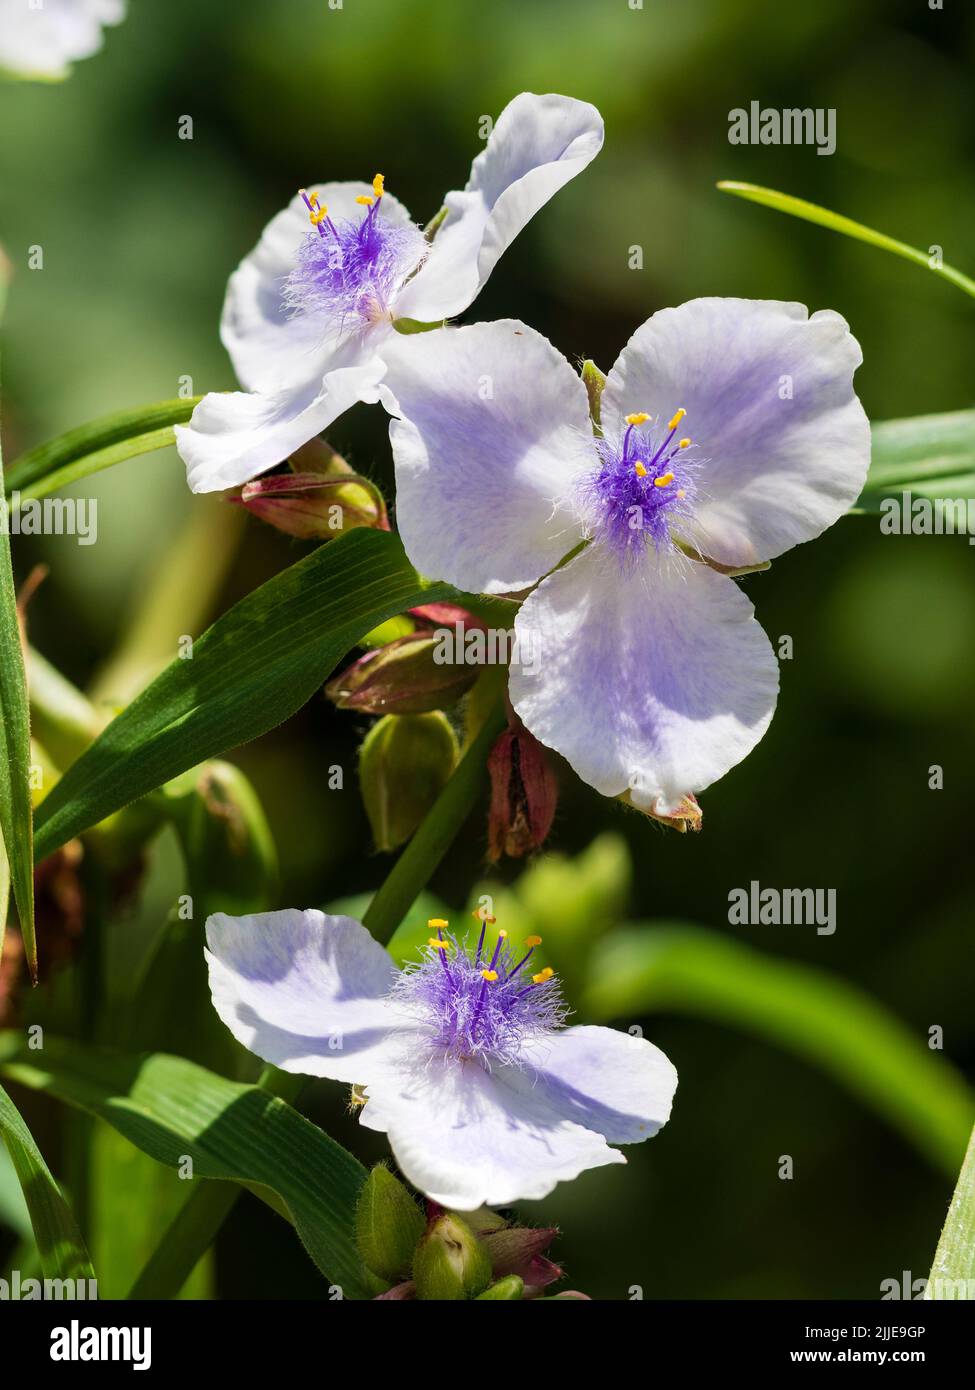 Fethery centered blue and white flowers of the summer blooming hardy perennial spiderwort, Tradescantia (Andersoniana Group) 'Iris Pritchard' Stock Photo